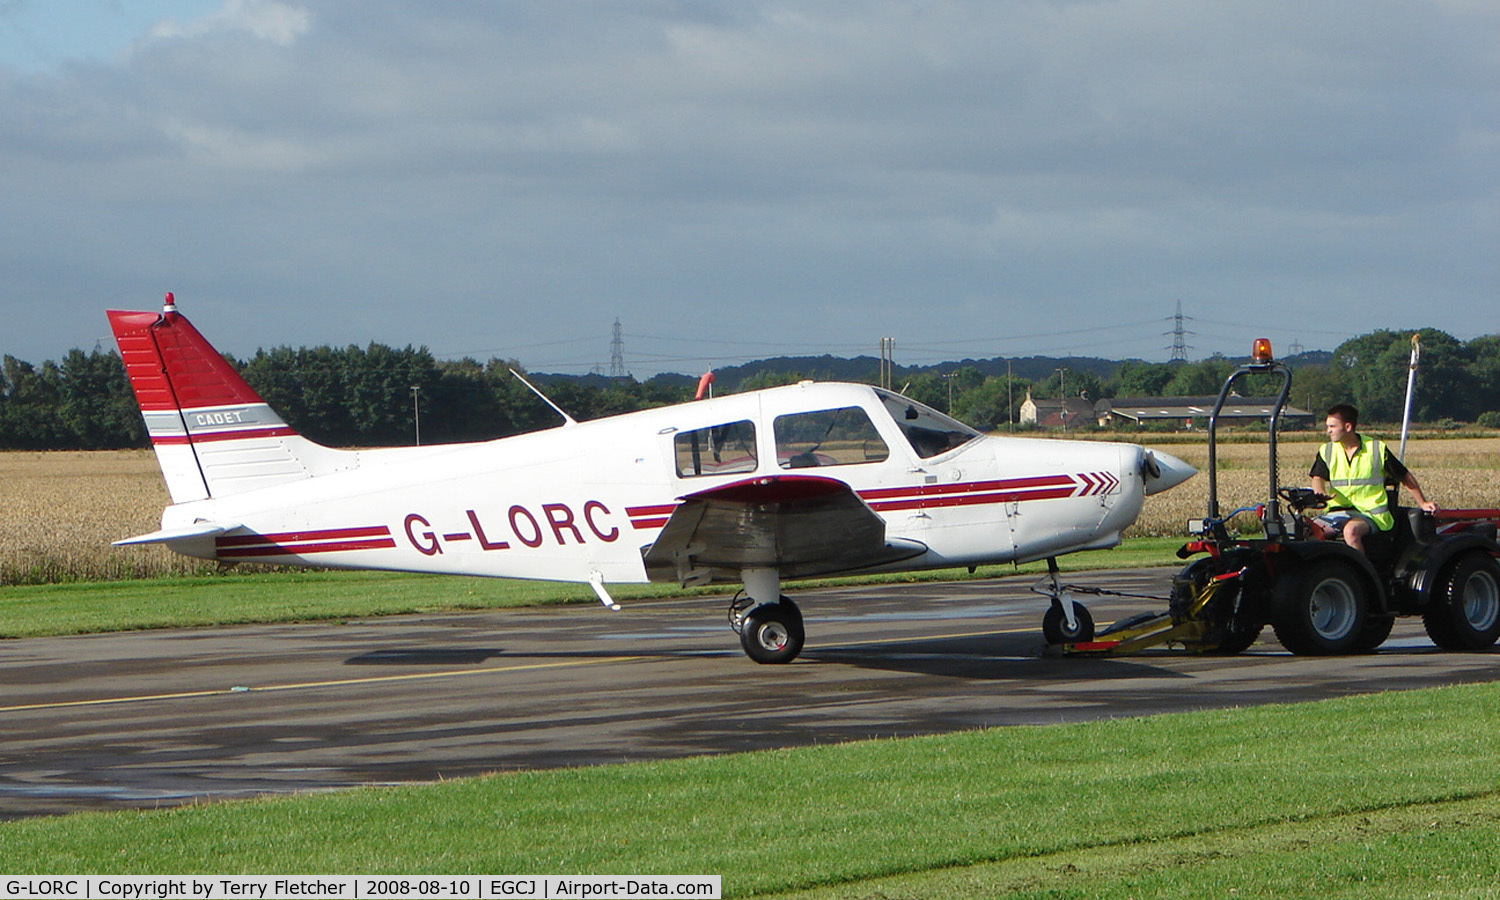 G-LORC, 1992 Piper PA-28-161 Cadet C/N 2841339, Resident aircraft at Sherburn - seen during 2008 LAA Regional Fly in